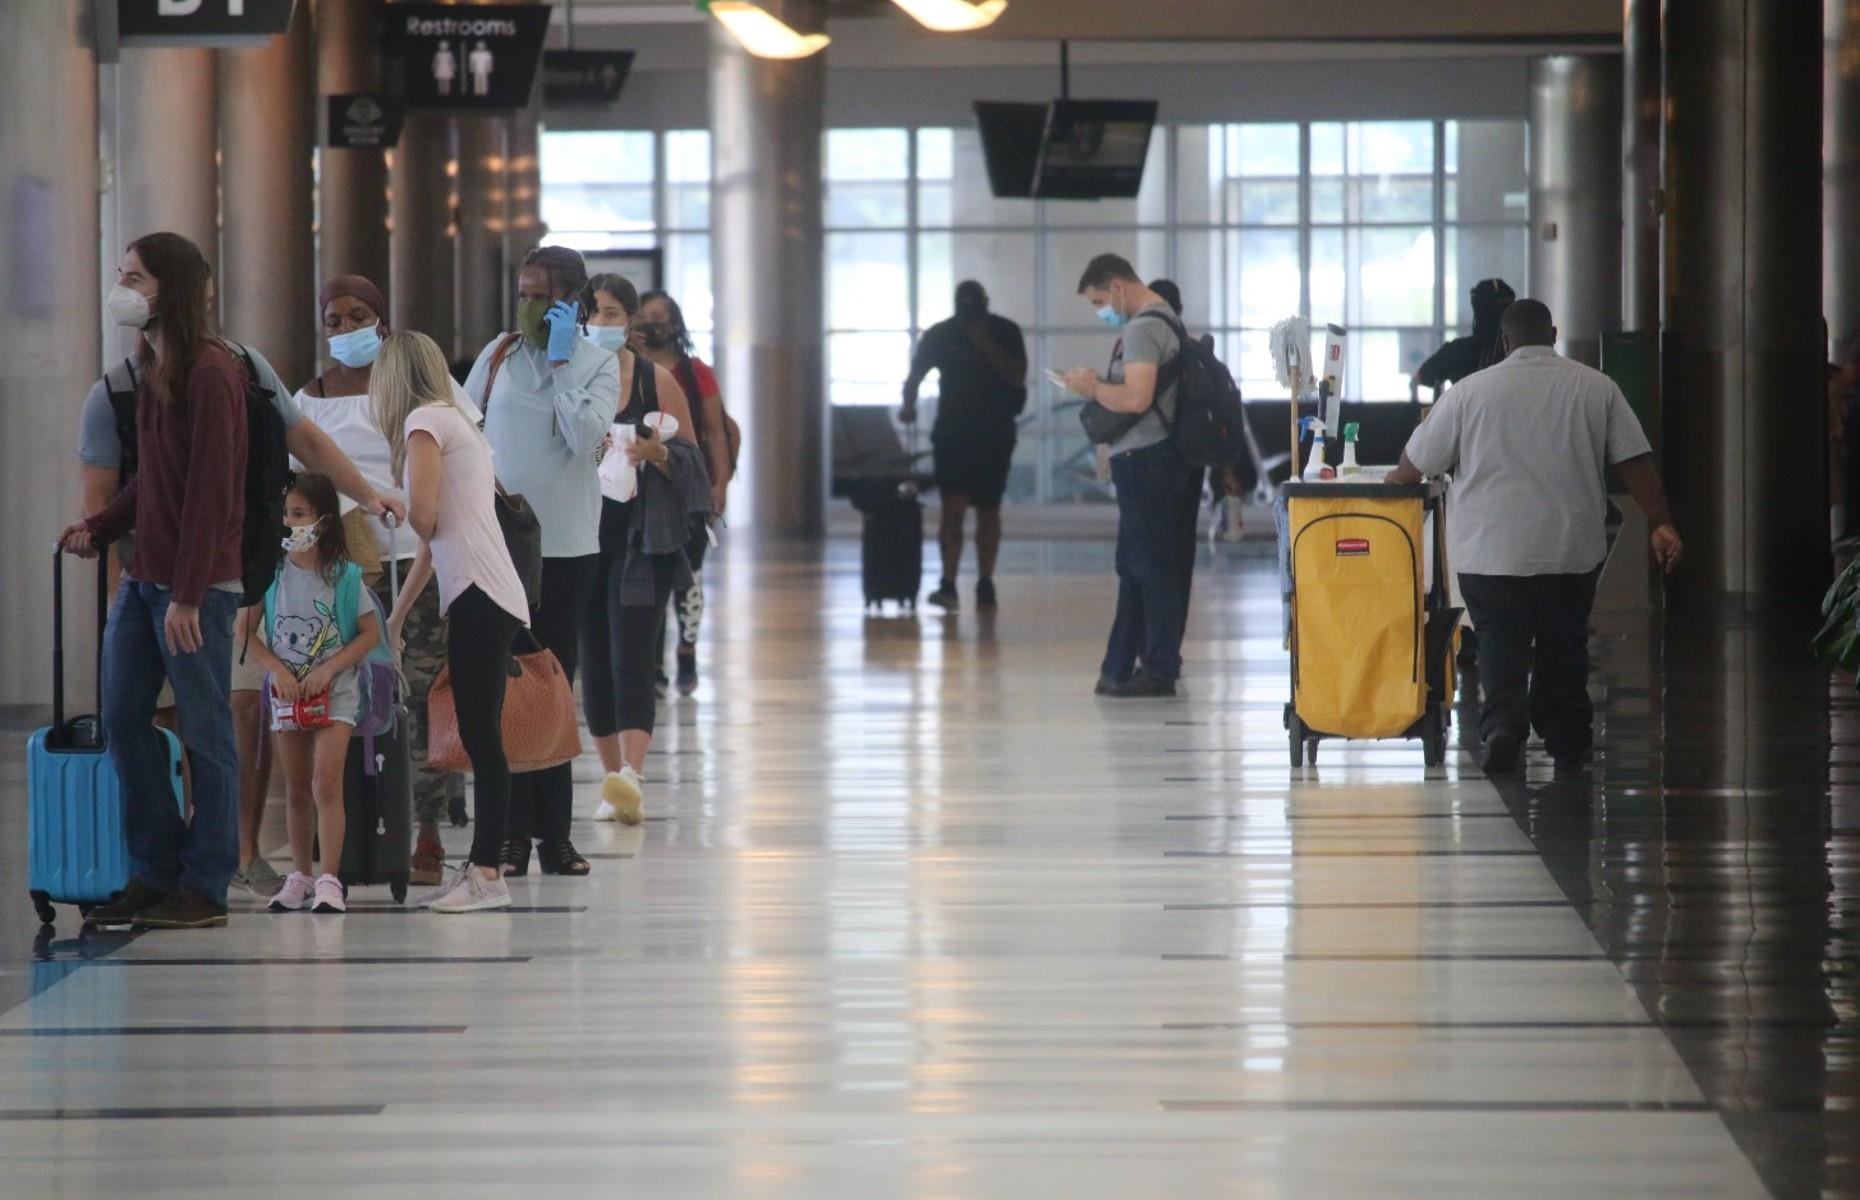 <p>Thanks to a $201.6 million revamp completed in 2014, <a href="https://www.flybirmingham.com/">Birmingham-Shuttlesworth International Airport</a> is slick and easy to navigate. During the four-year project, the airport, located around four miles (6.4km) from downtown Birmingham, was stripped out and expanded to twice its former size. Other improvements include a single, centralized security point, inline baggage system and the addition of extra gates, all of which make for a more efficient flying experience.</p>